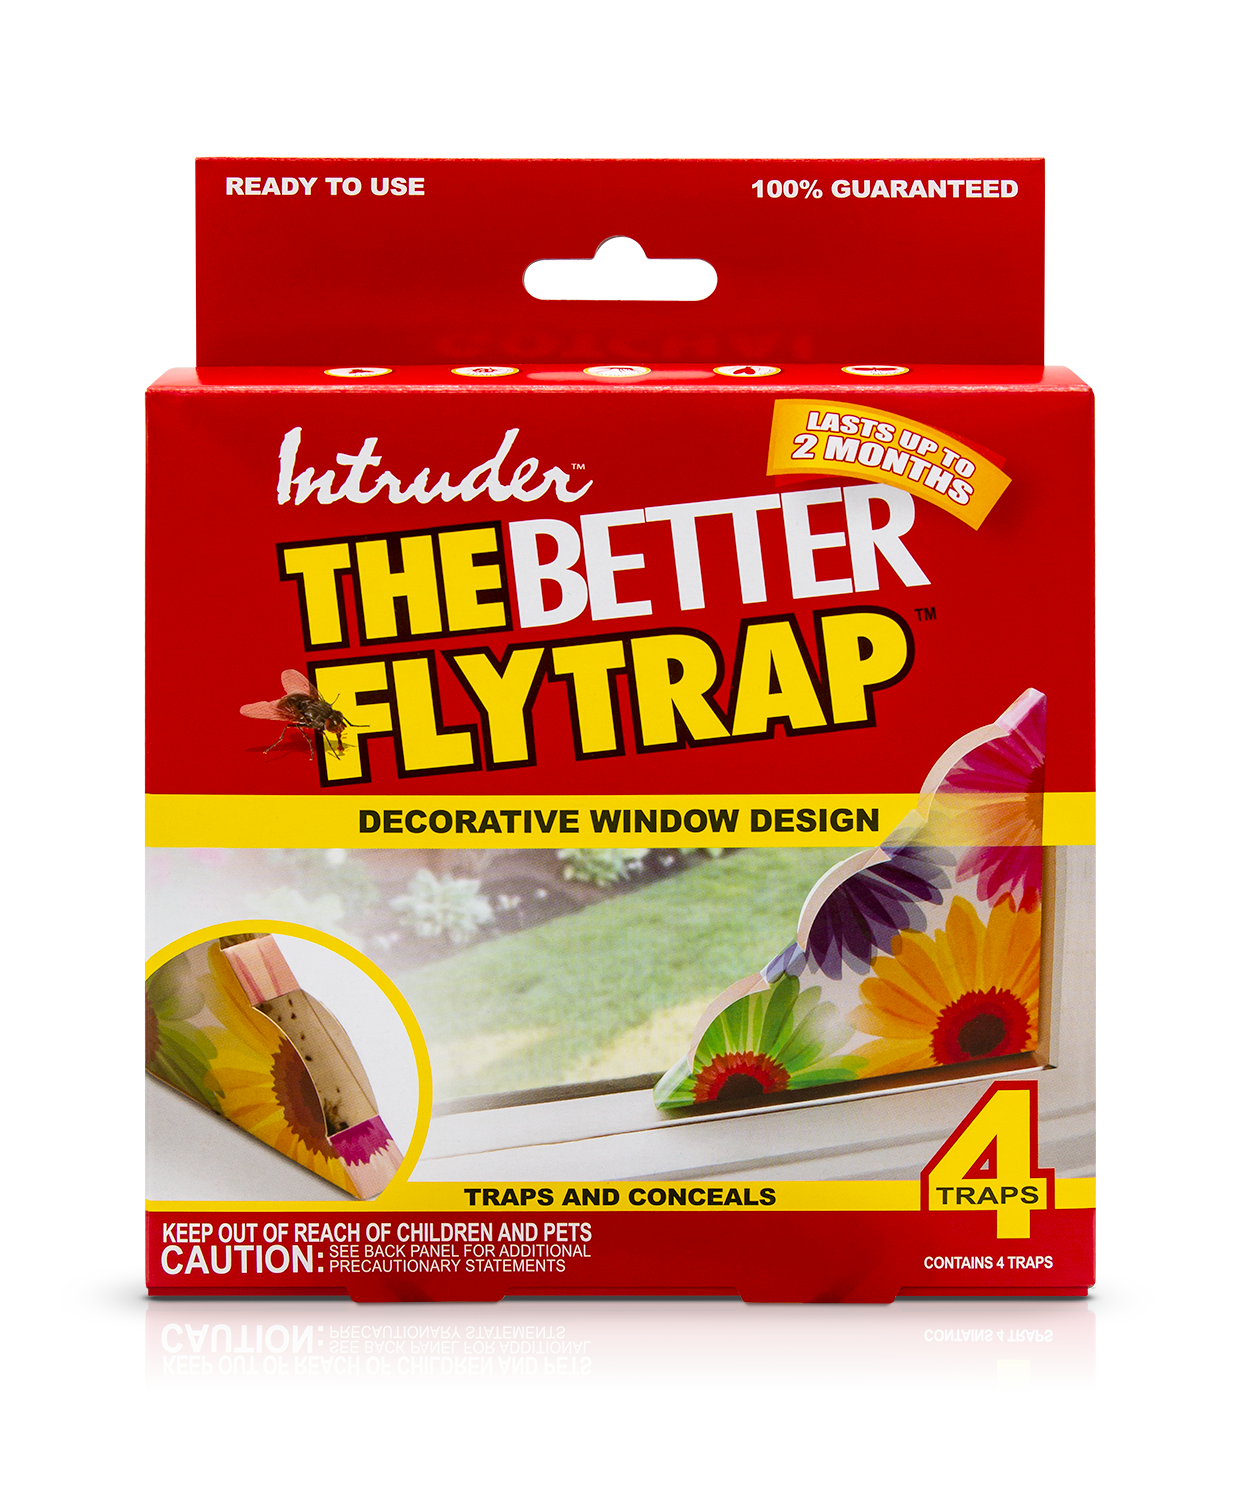 Yall think this a good idea? #fly #trap #flytrap #help #save #home #fr